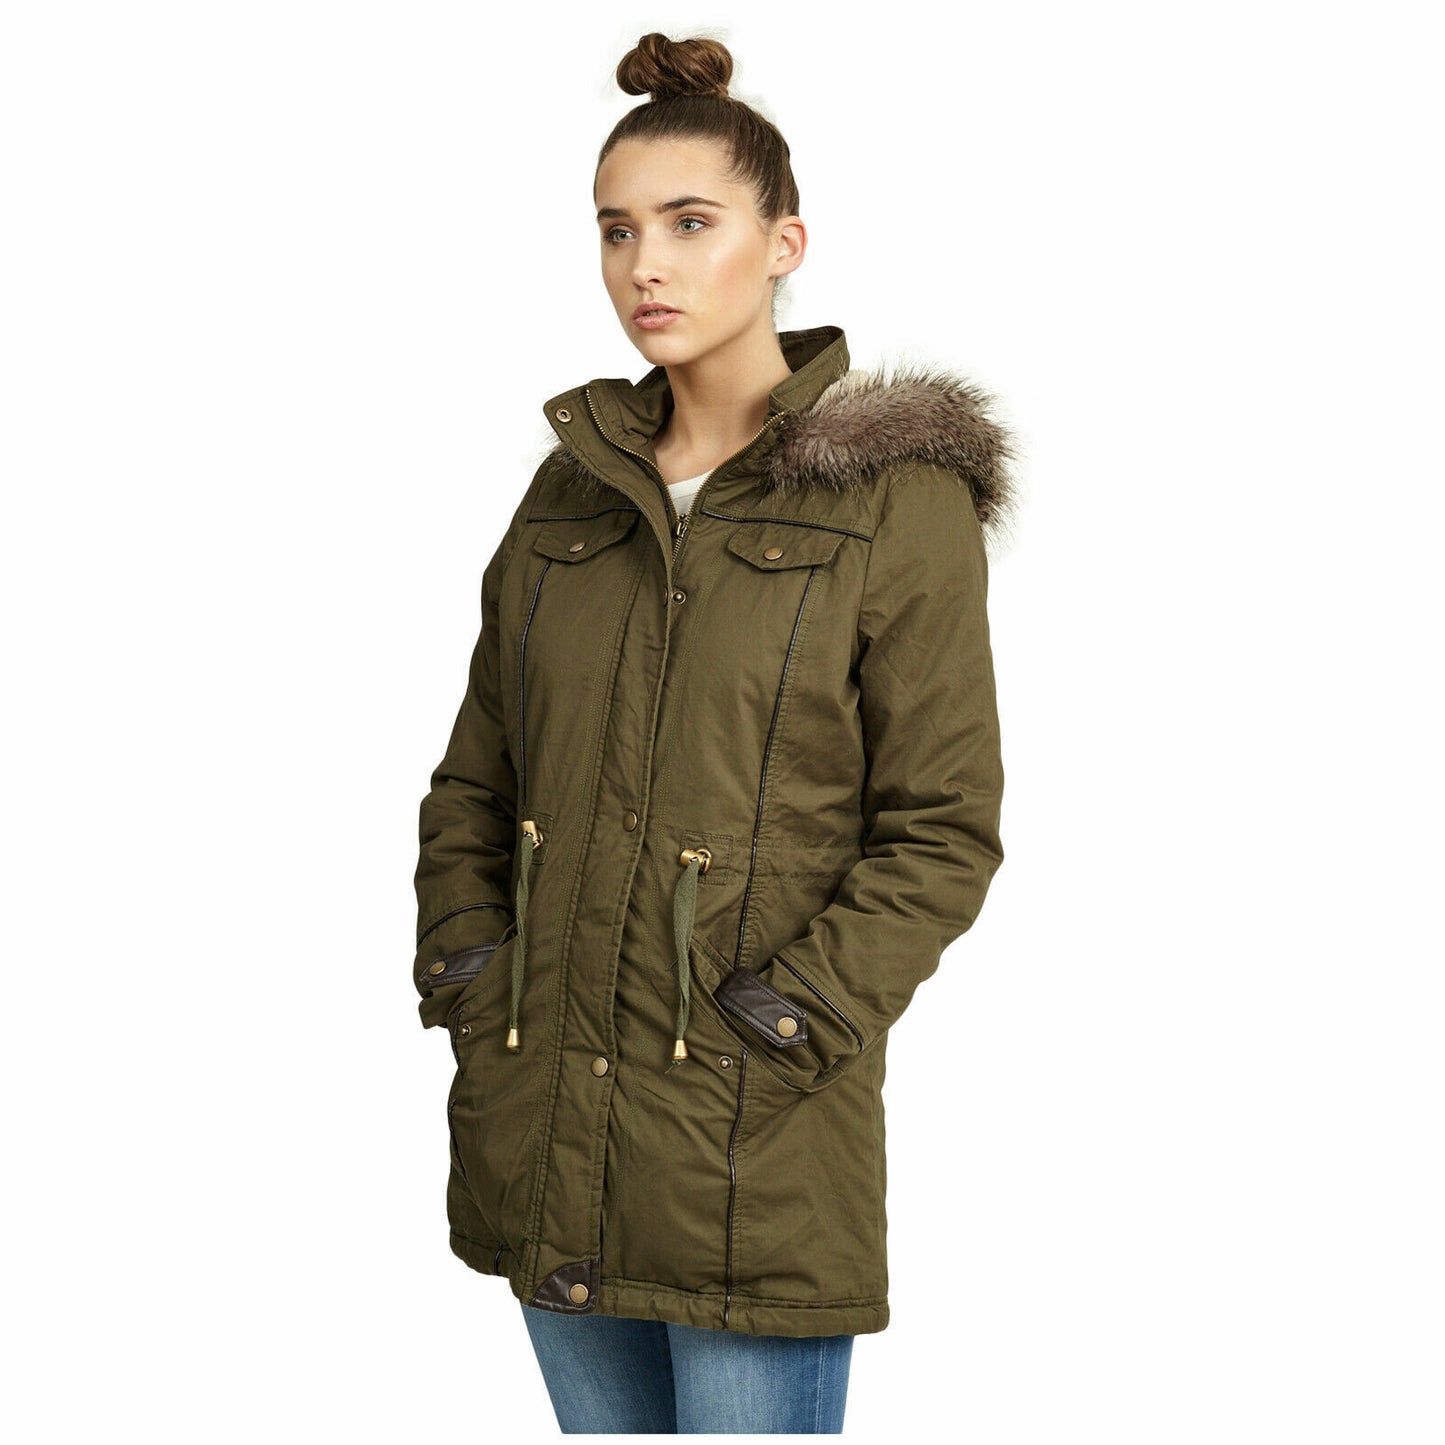 LADIES LIGHTWEIGHT PADDED MILITARY FISHTAIL FAUX FUR HOODED PLUS SIZE JACKET TOP